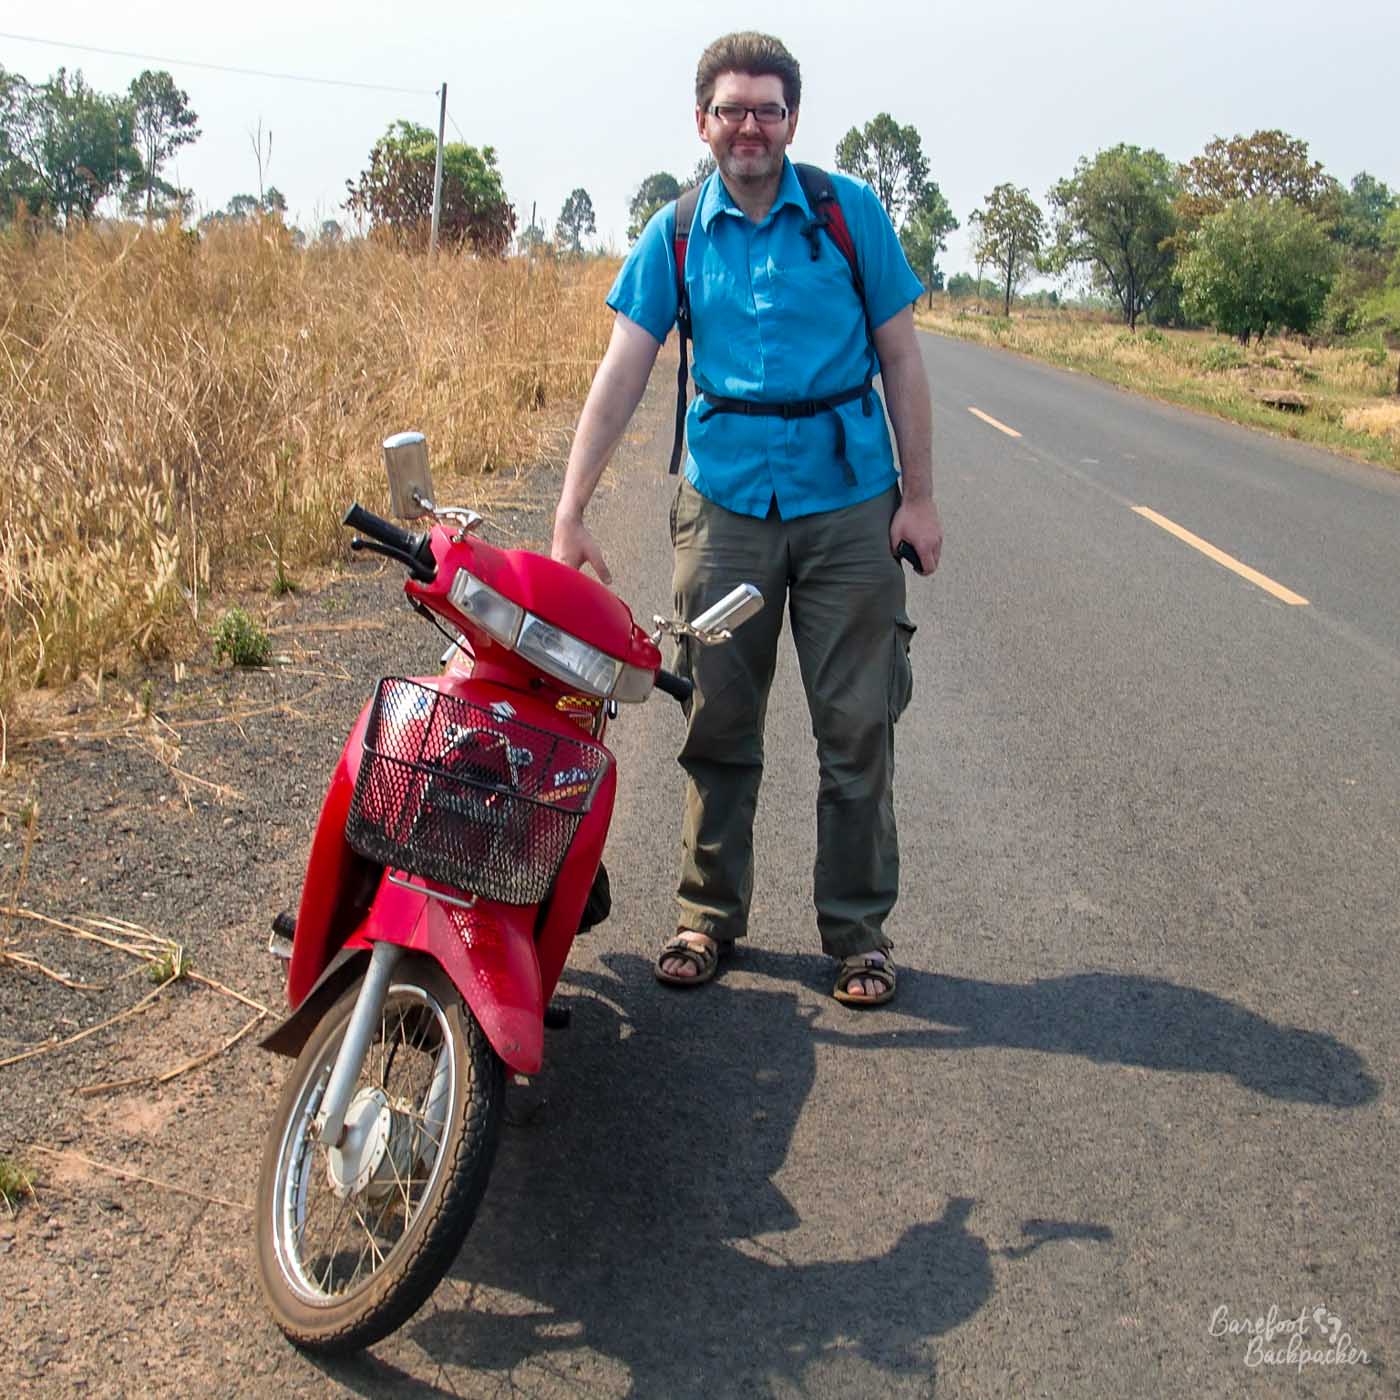 A male backpacker stands next to a motorbike, on an otherwise empty road going through shrubland.